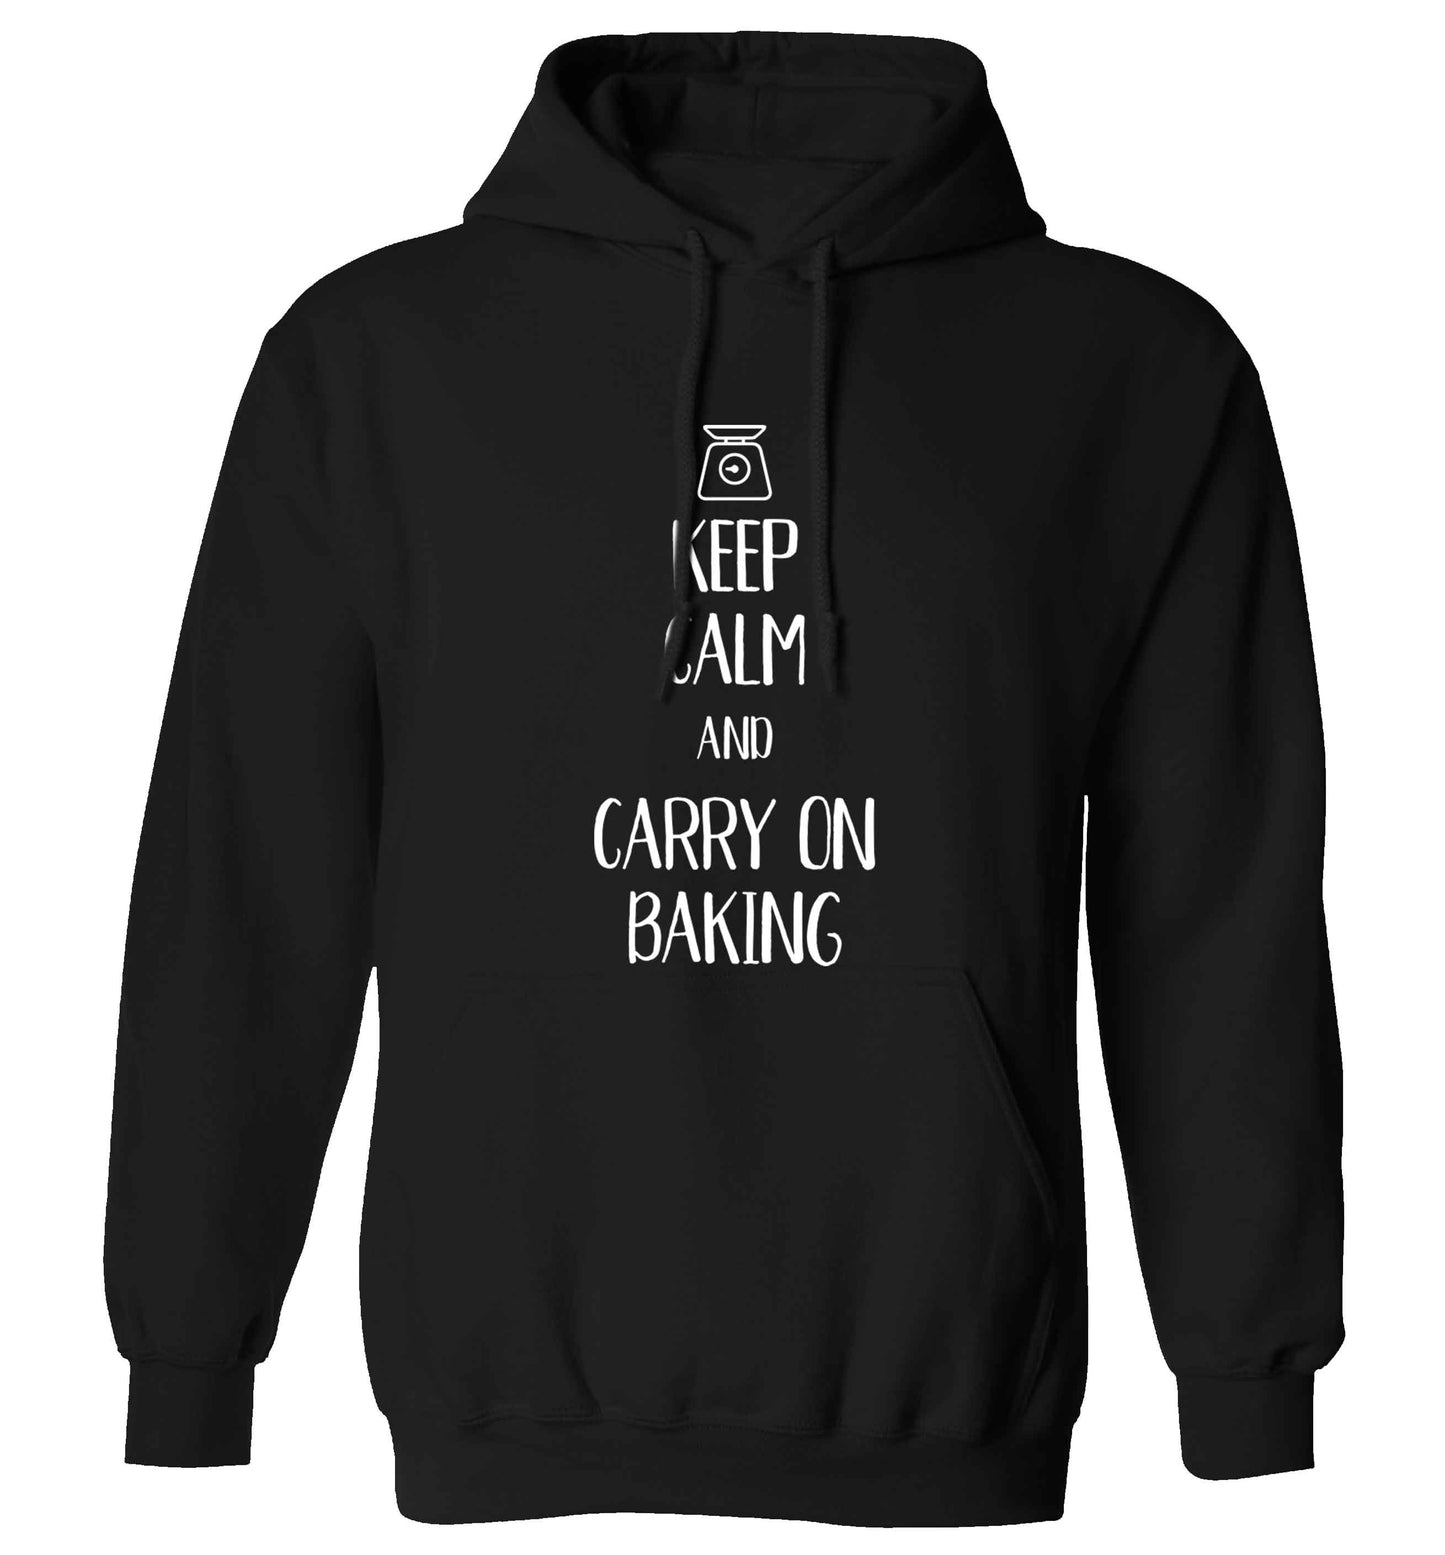 Keep calm and carry on baking adults unisex black hoodie 2XL